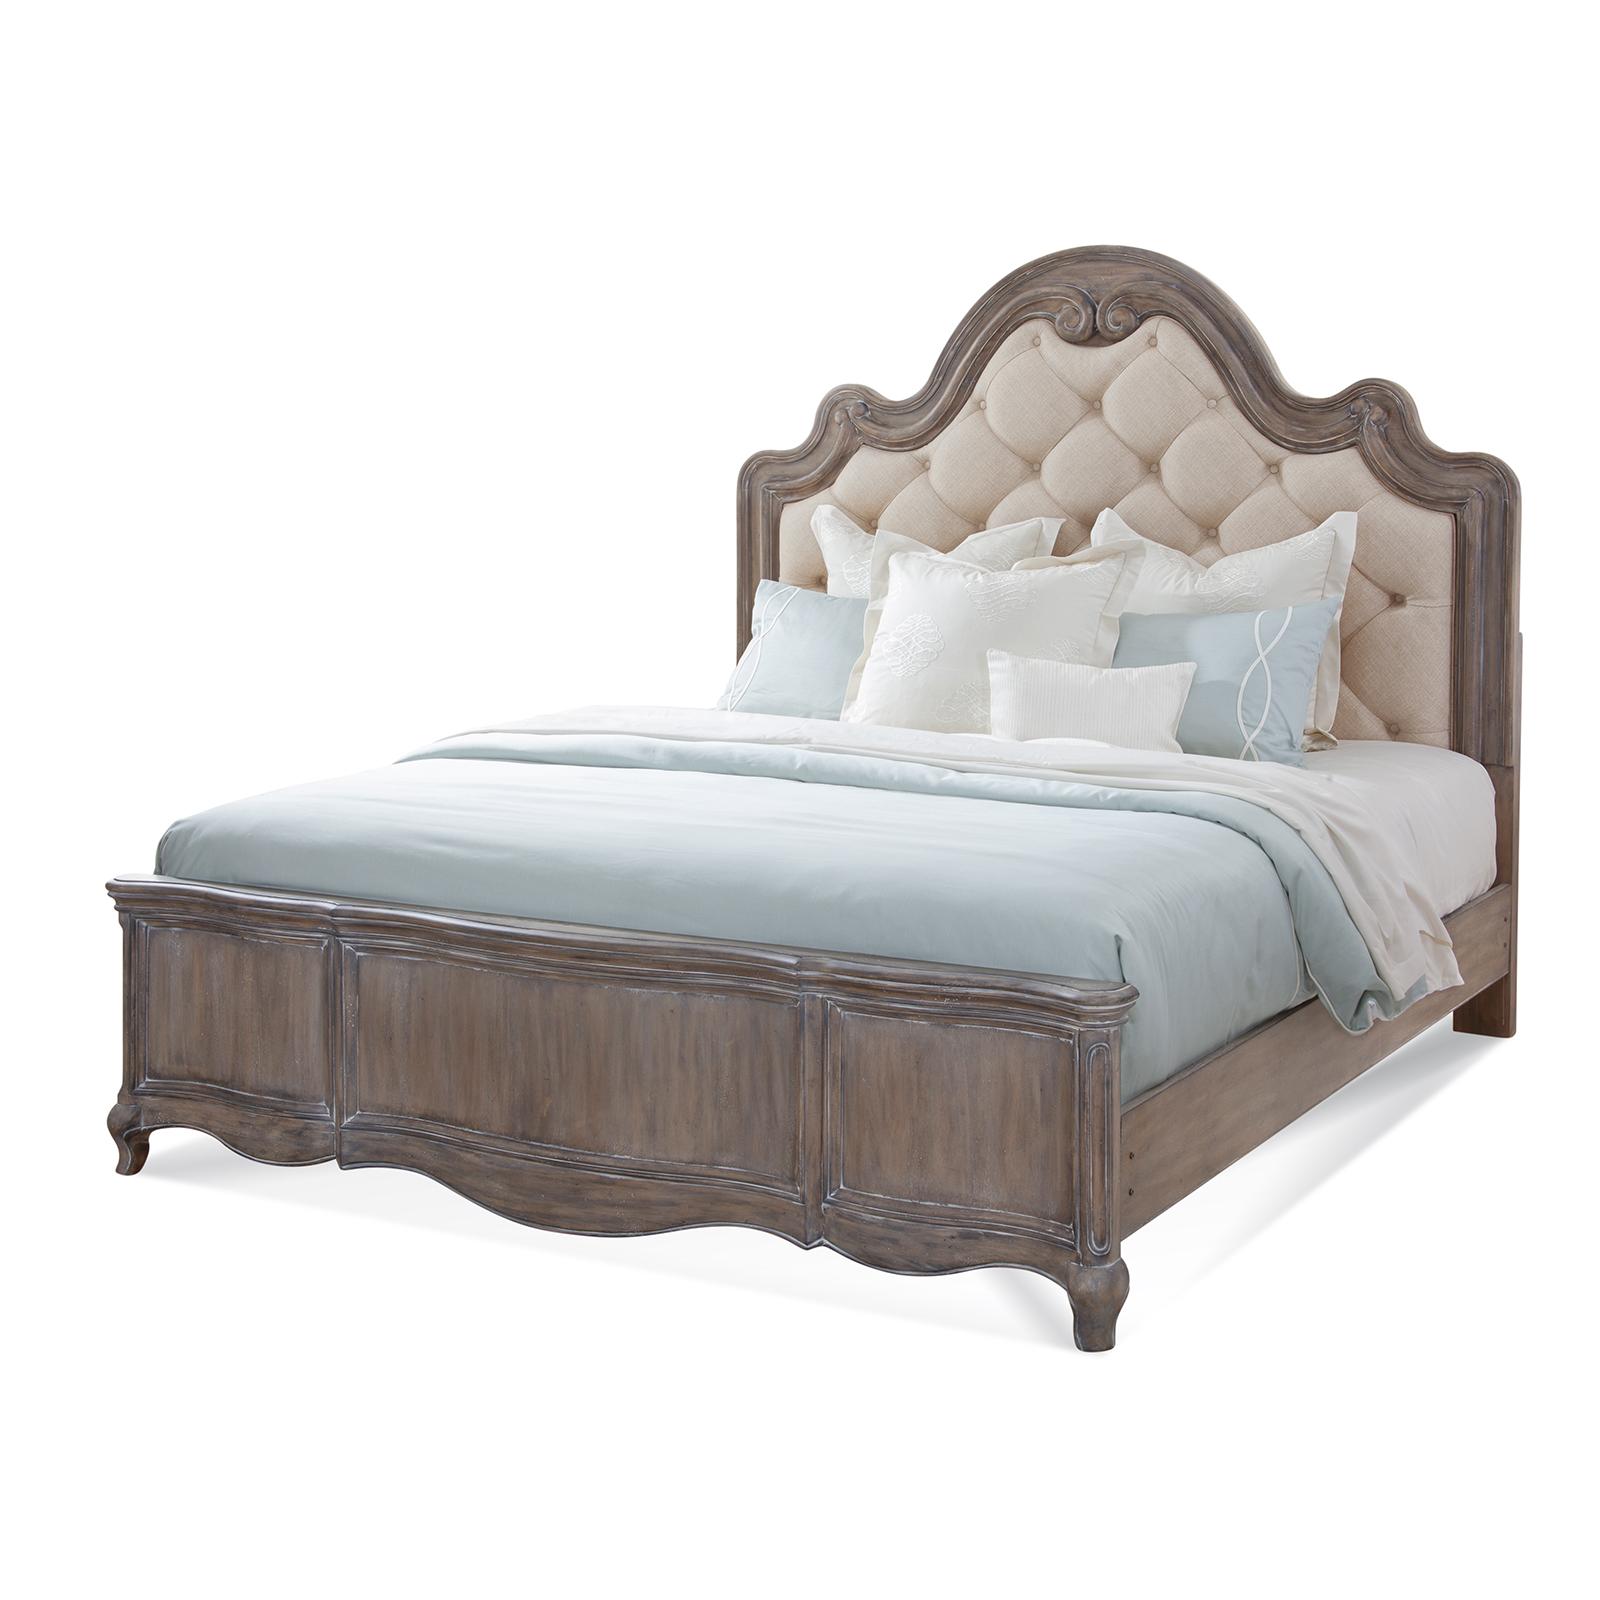 Classic, Traditional Panel Bed GENOA 1575-50TUPH 1575-50TUPH in Antique, Gray Fabric